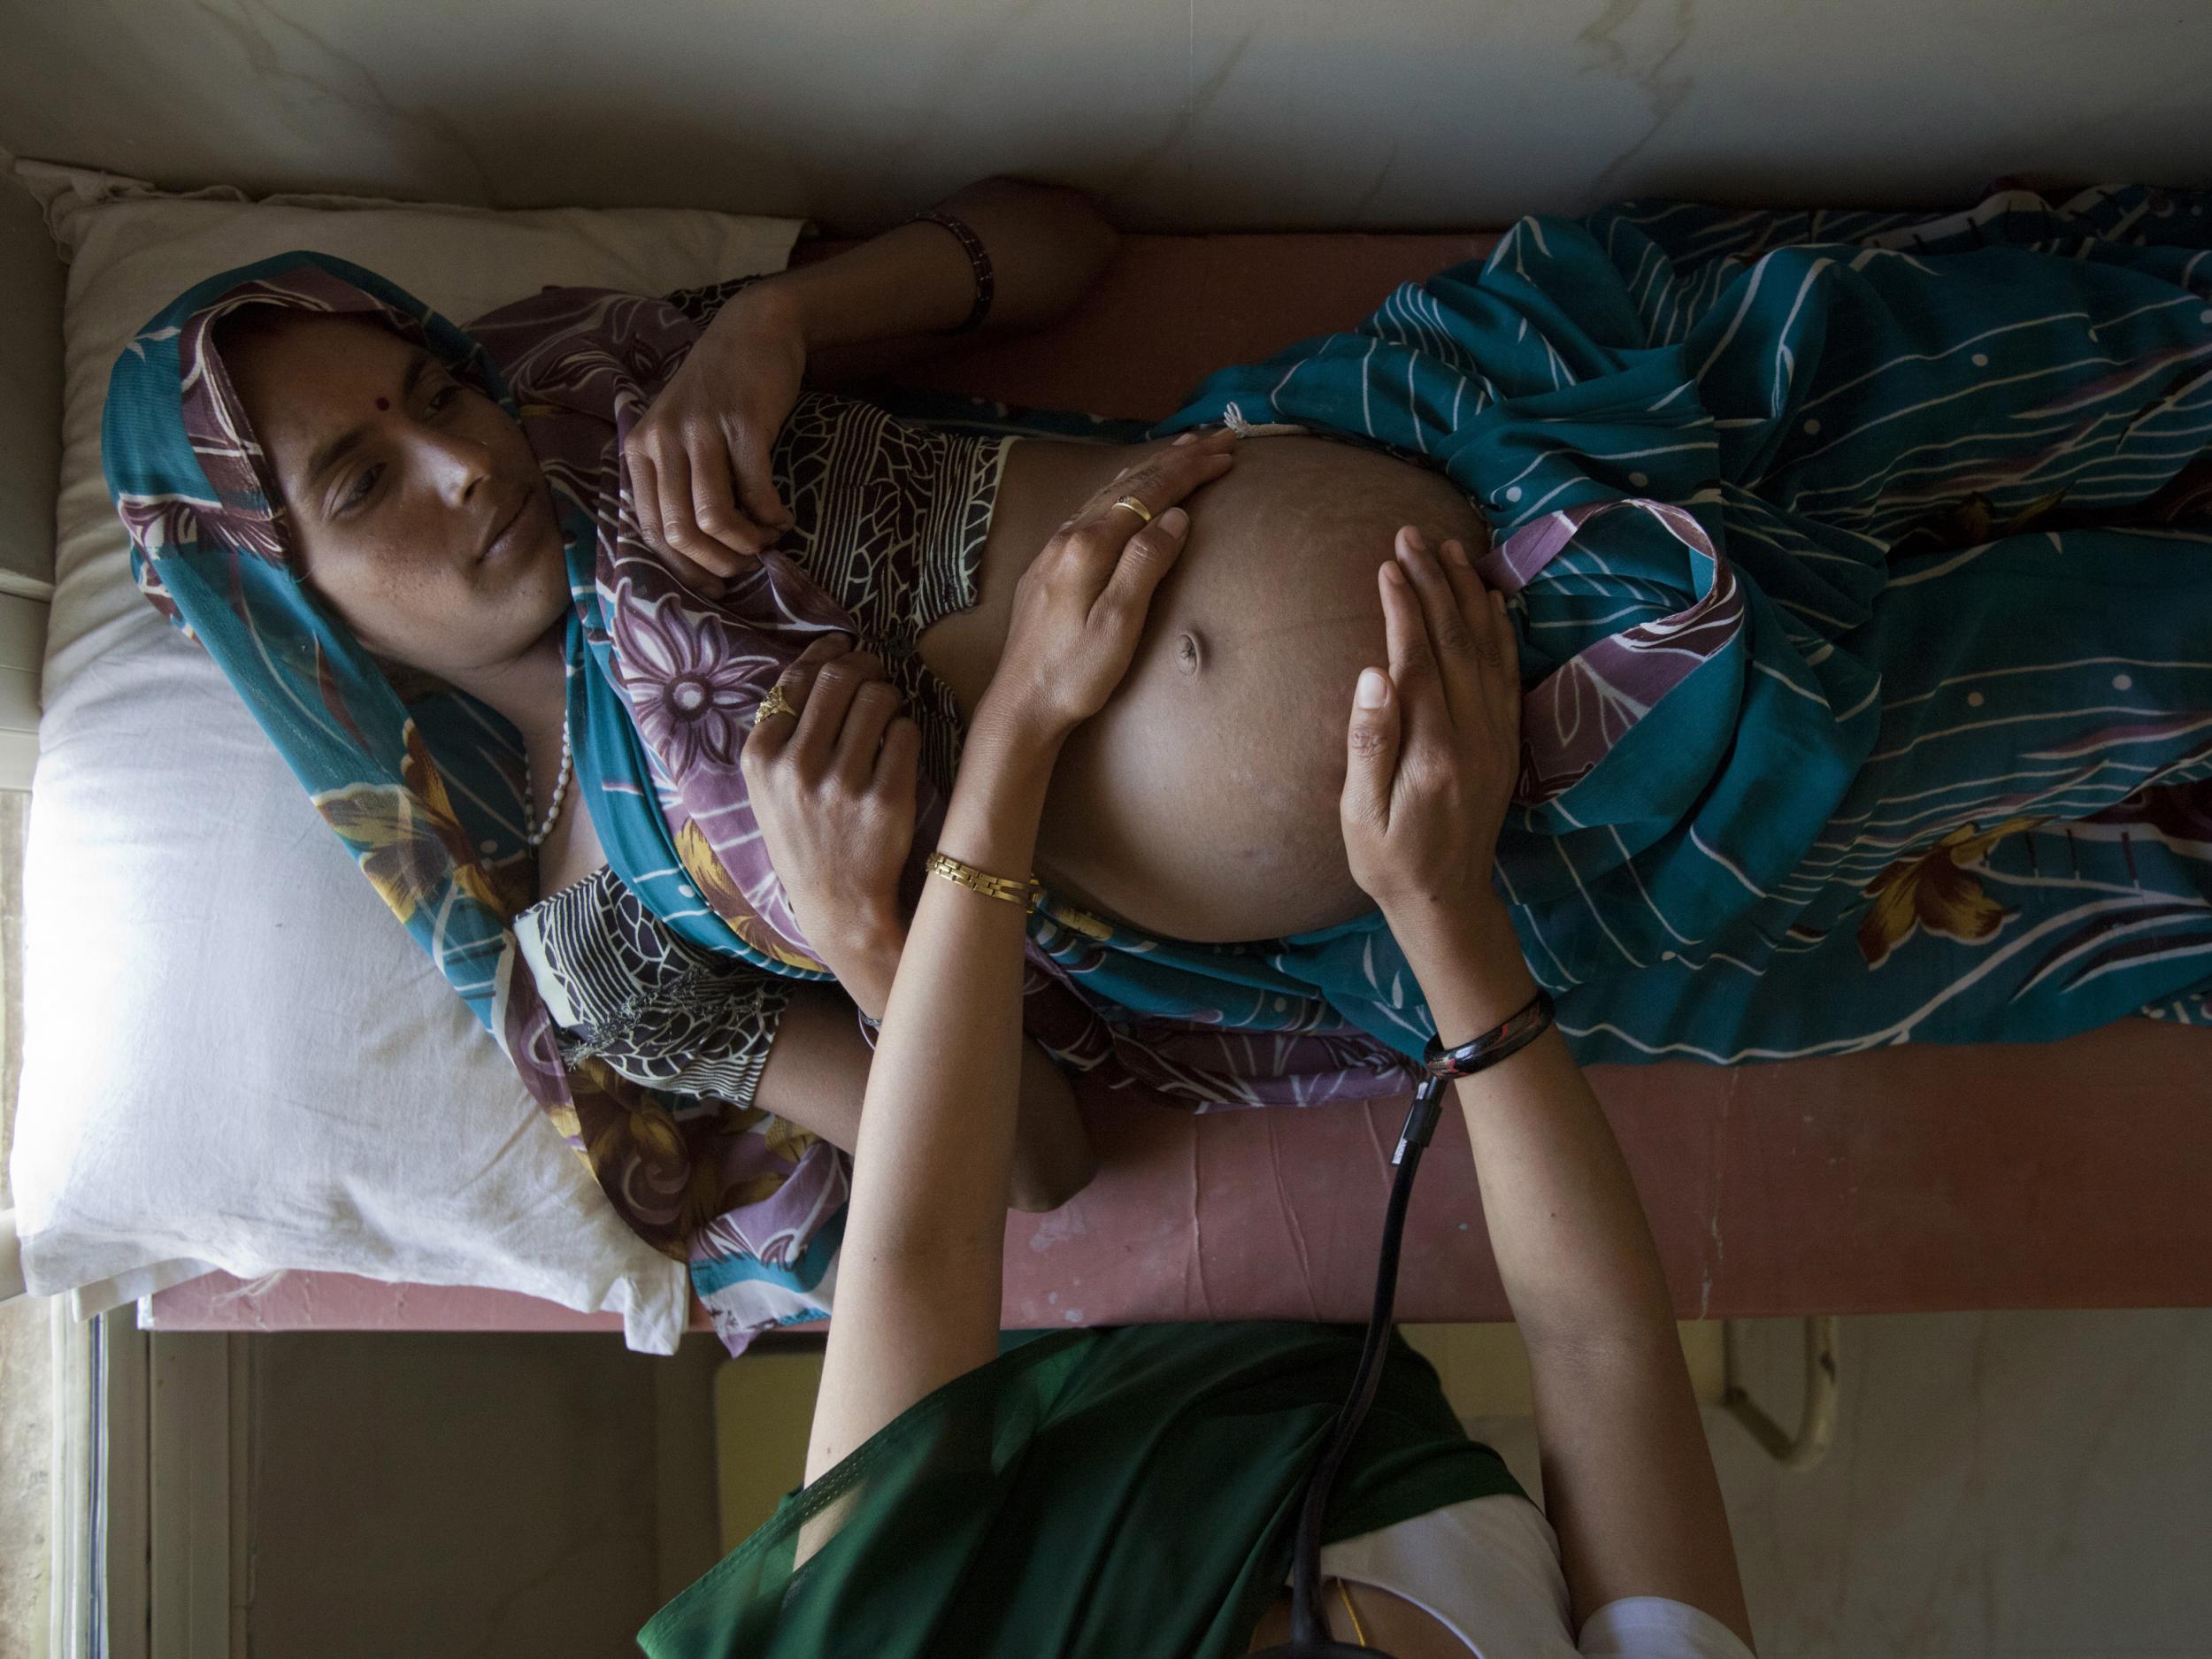 Indian Government advises pregnant women to avoid thinking about sex The Independent The Independent photo